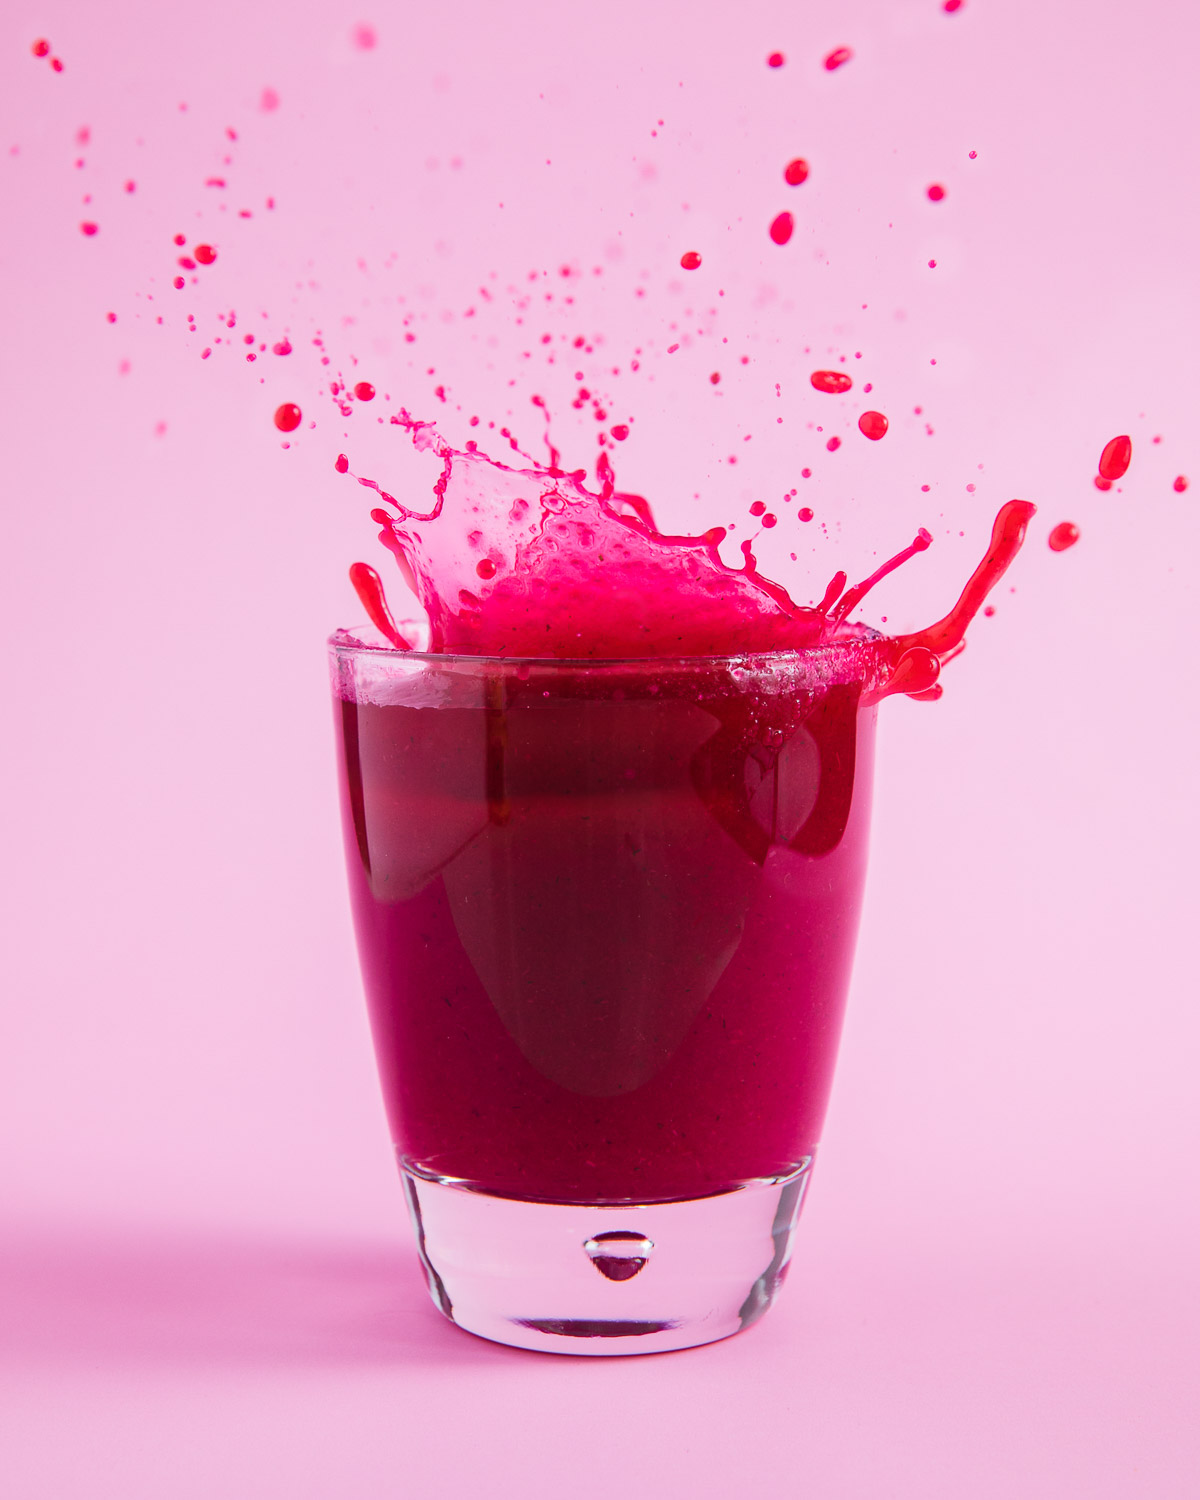 Styled drink photography for Toronto restaurant